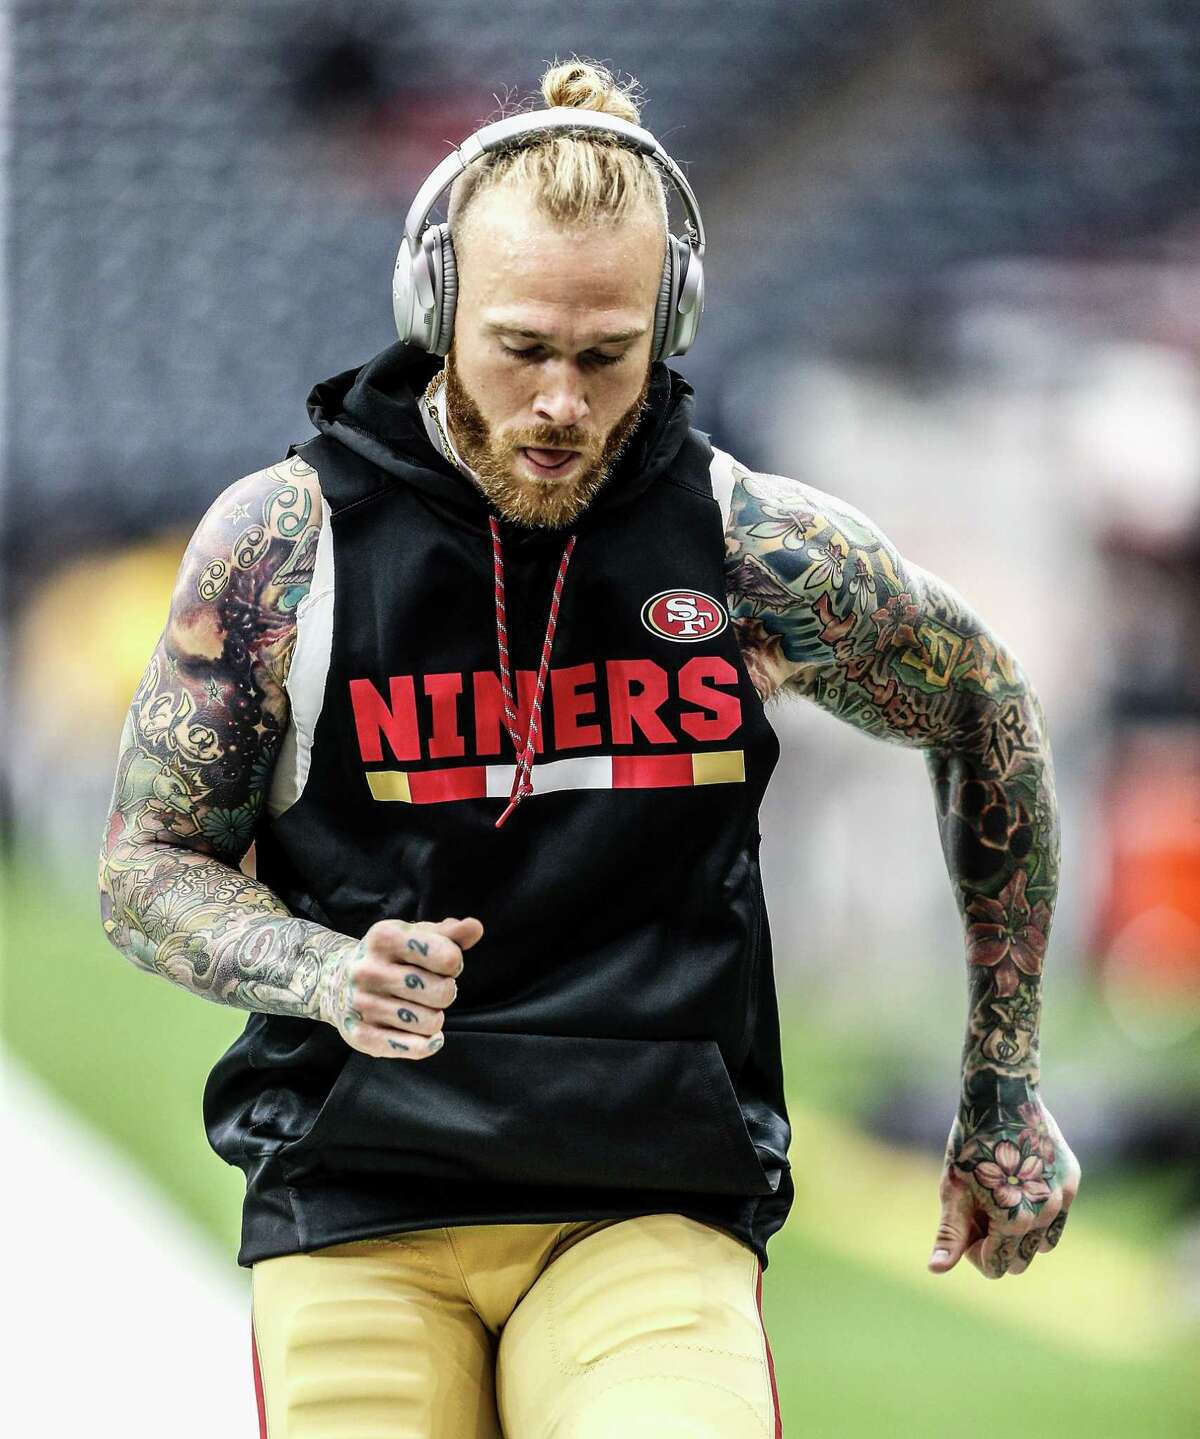 HOUSTON, TX - DECEMBER 10: Cassius Marsh #54 of the San Francisco 49ers warms up before playing the Houston Texans at NRG Stadium on December 10, 2017 in Houston, Texas. (Photo by Bob Levey/Getty Images)